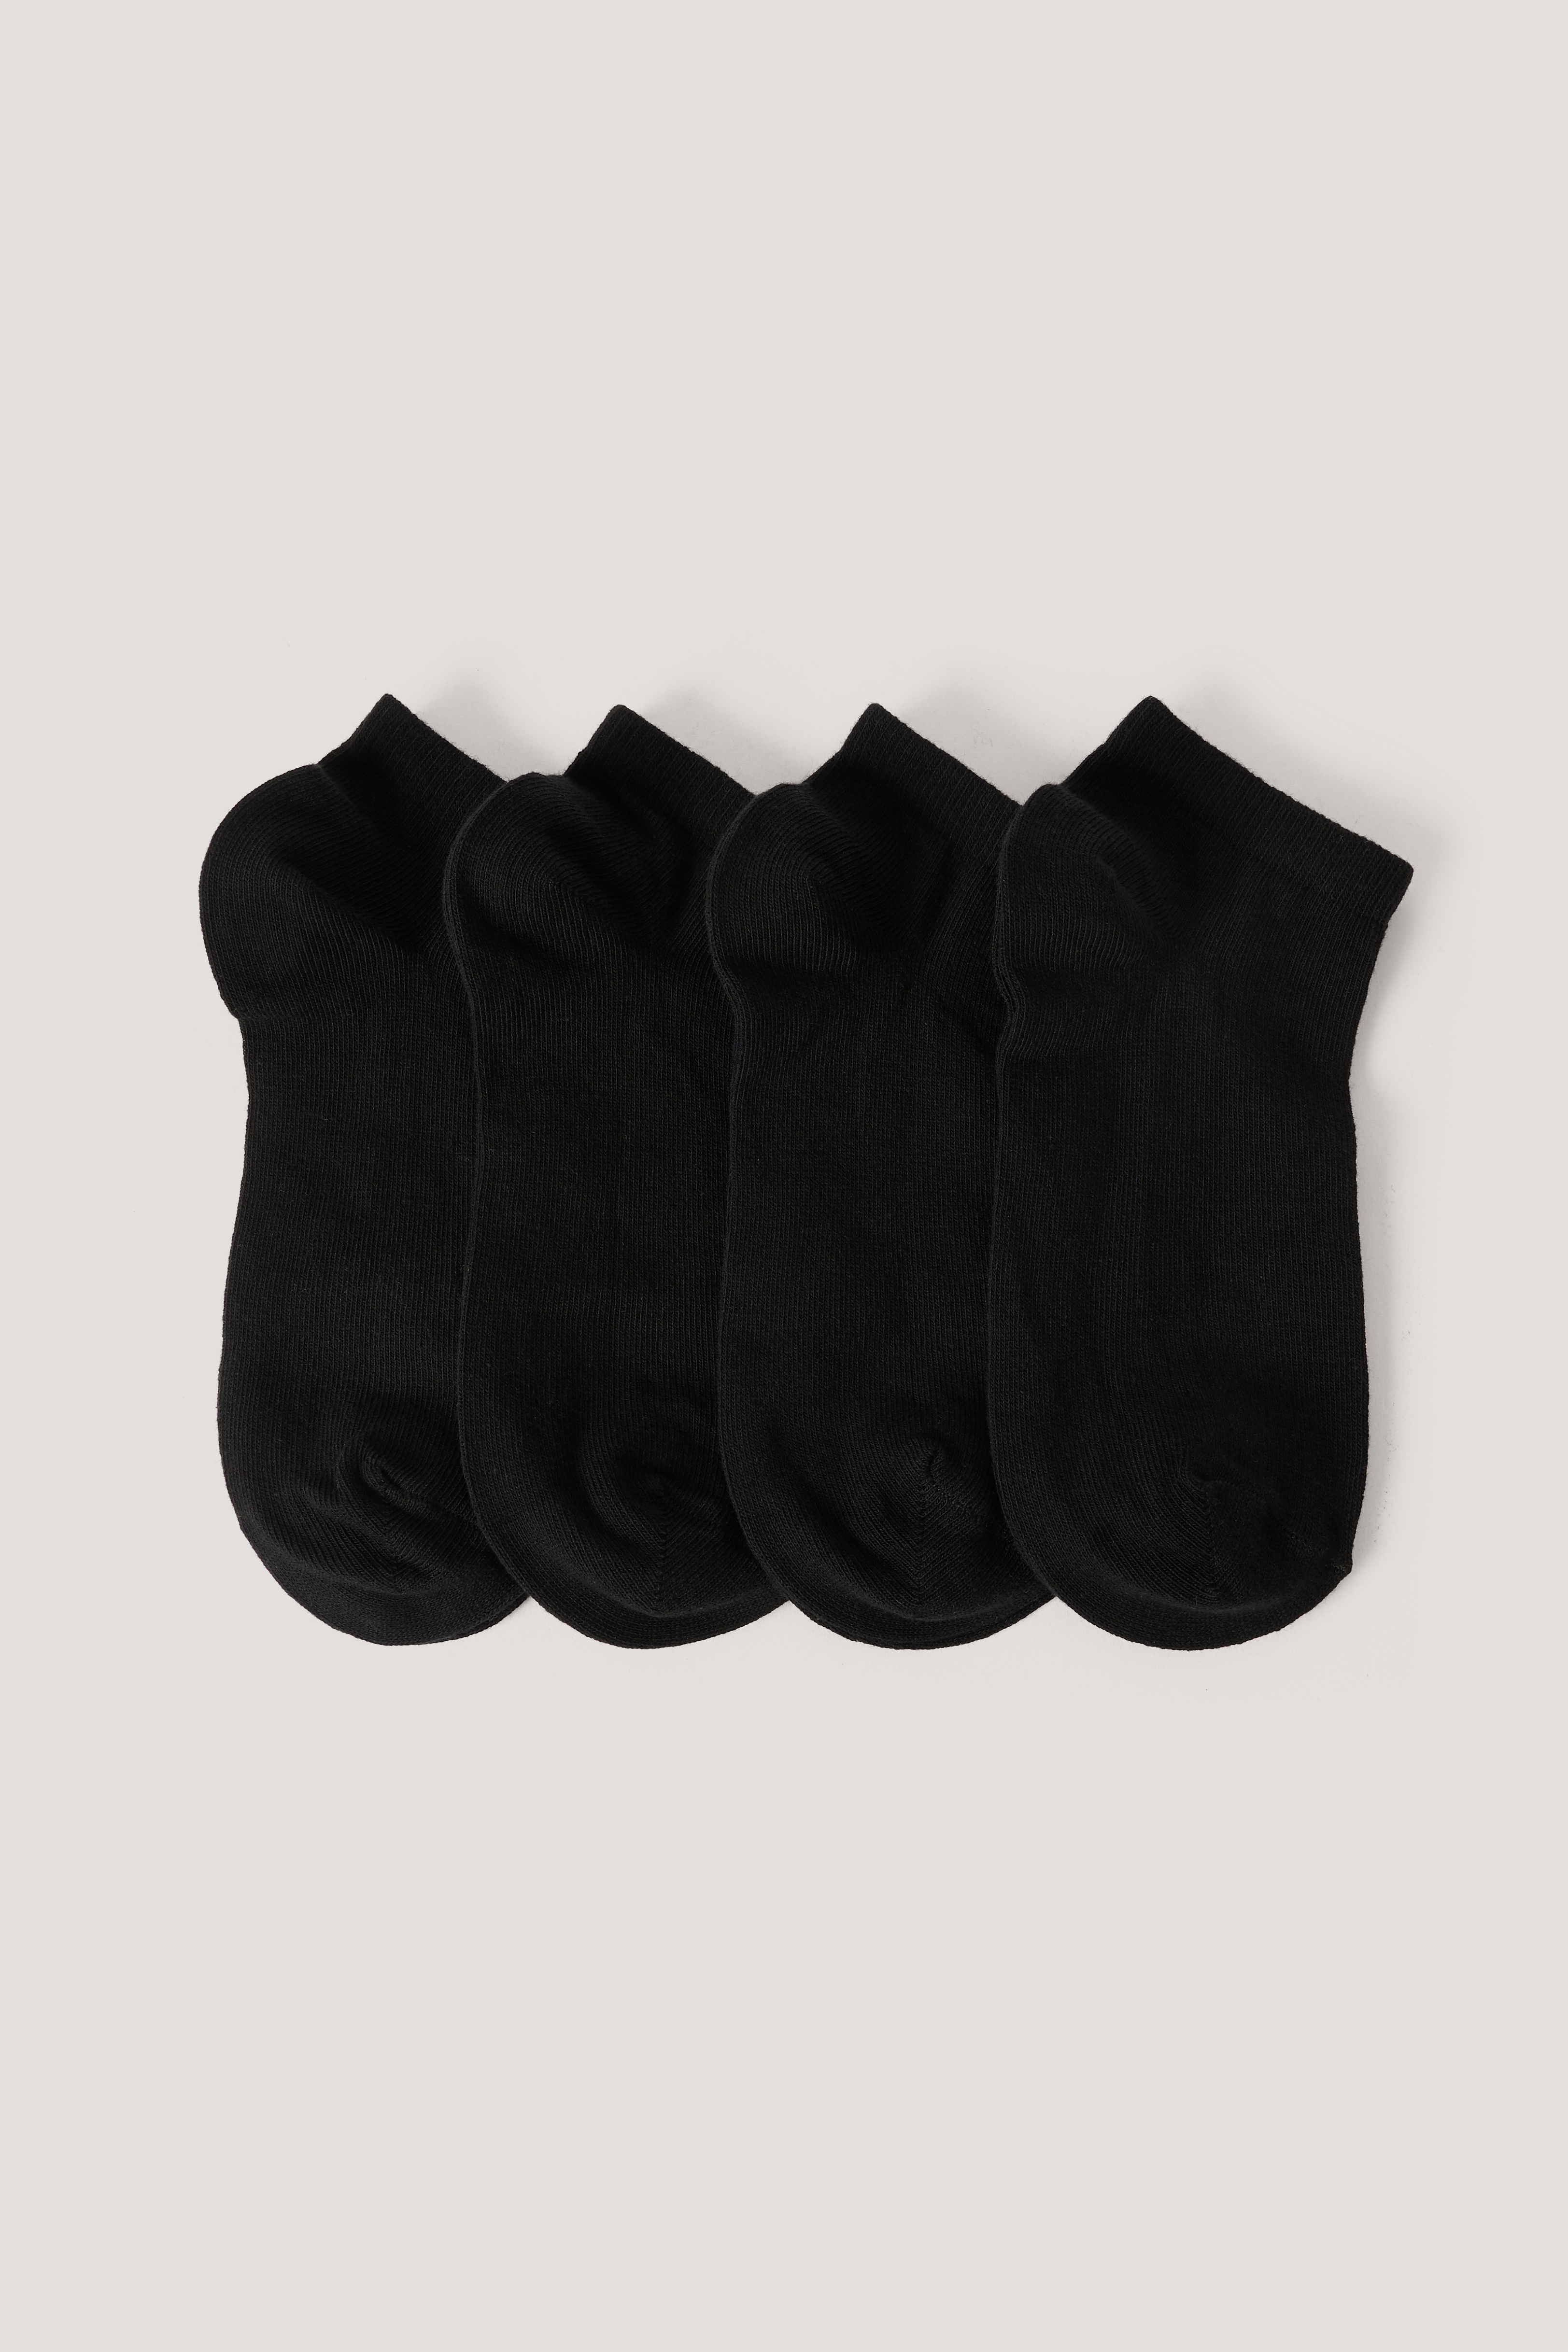 Black Invisible Sneakers 4 pack